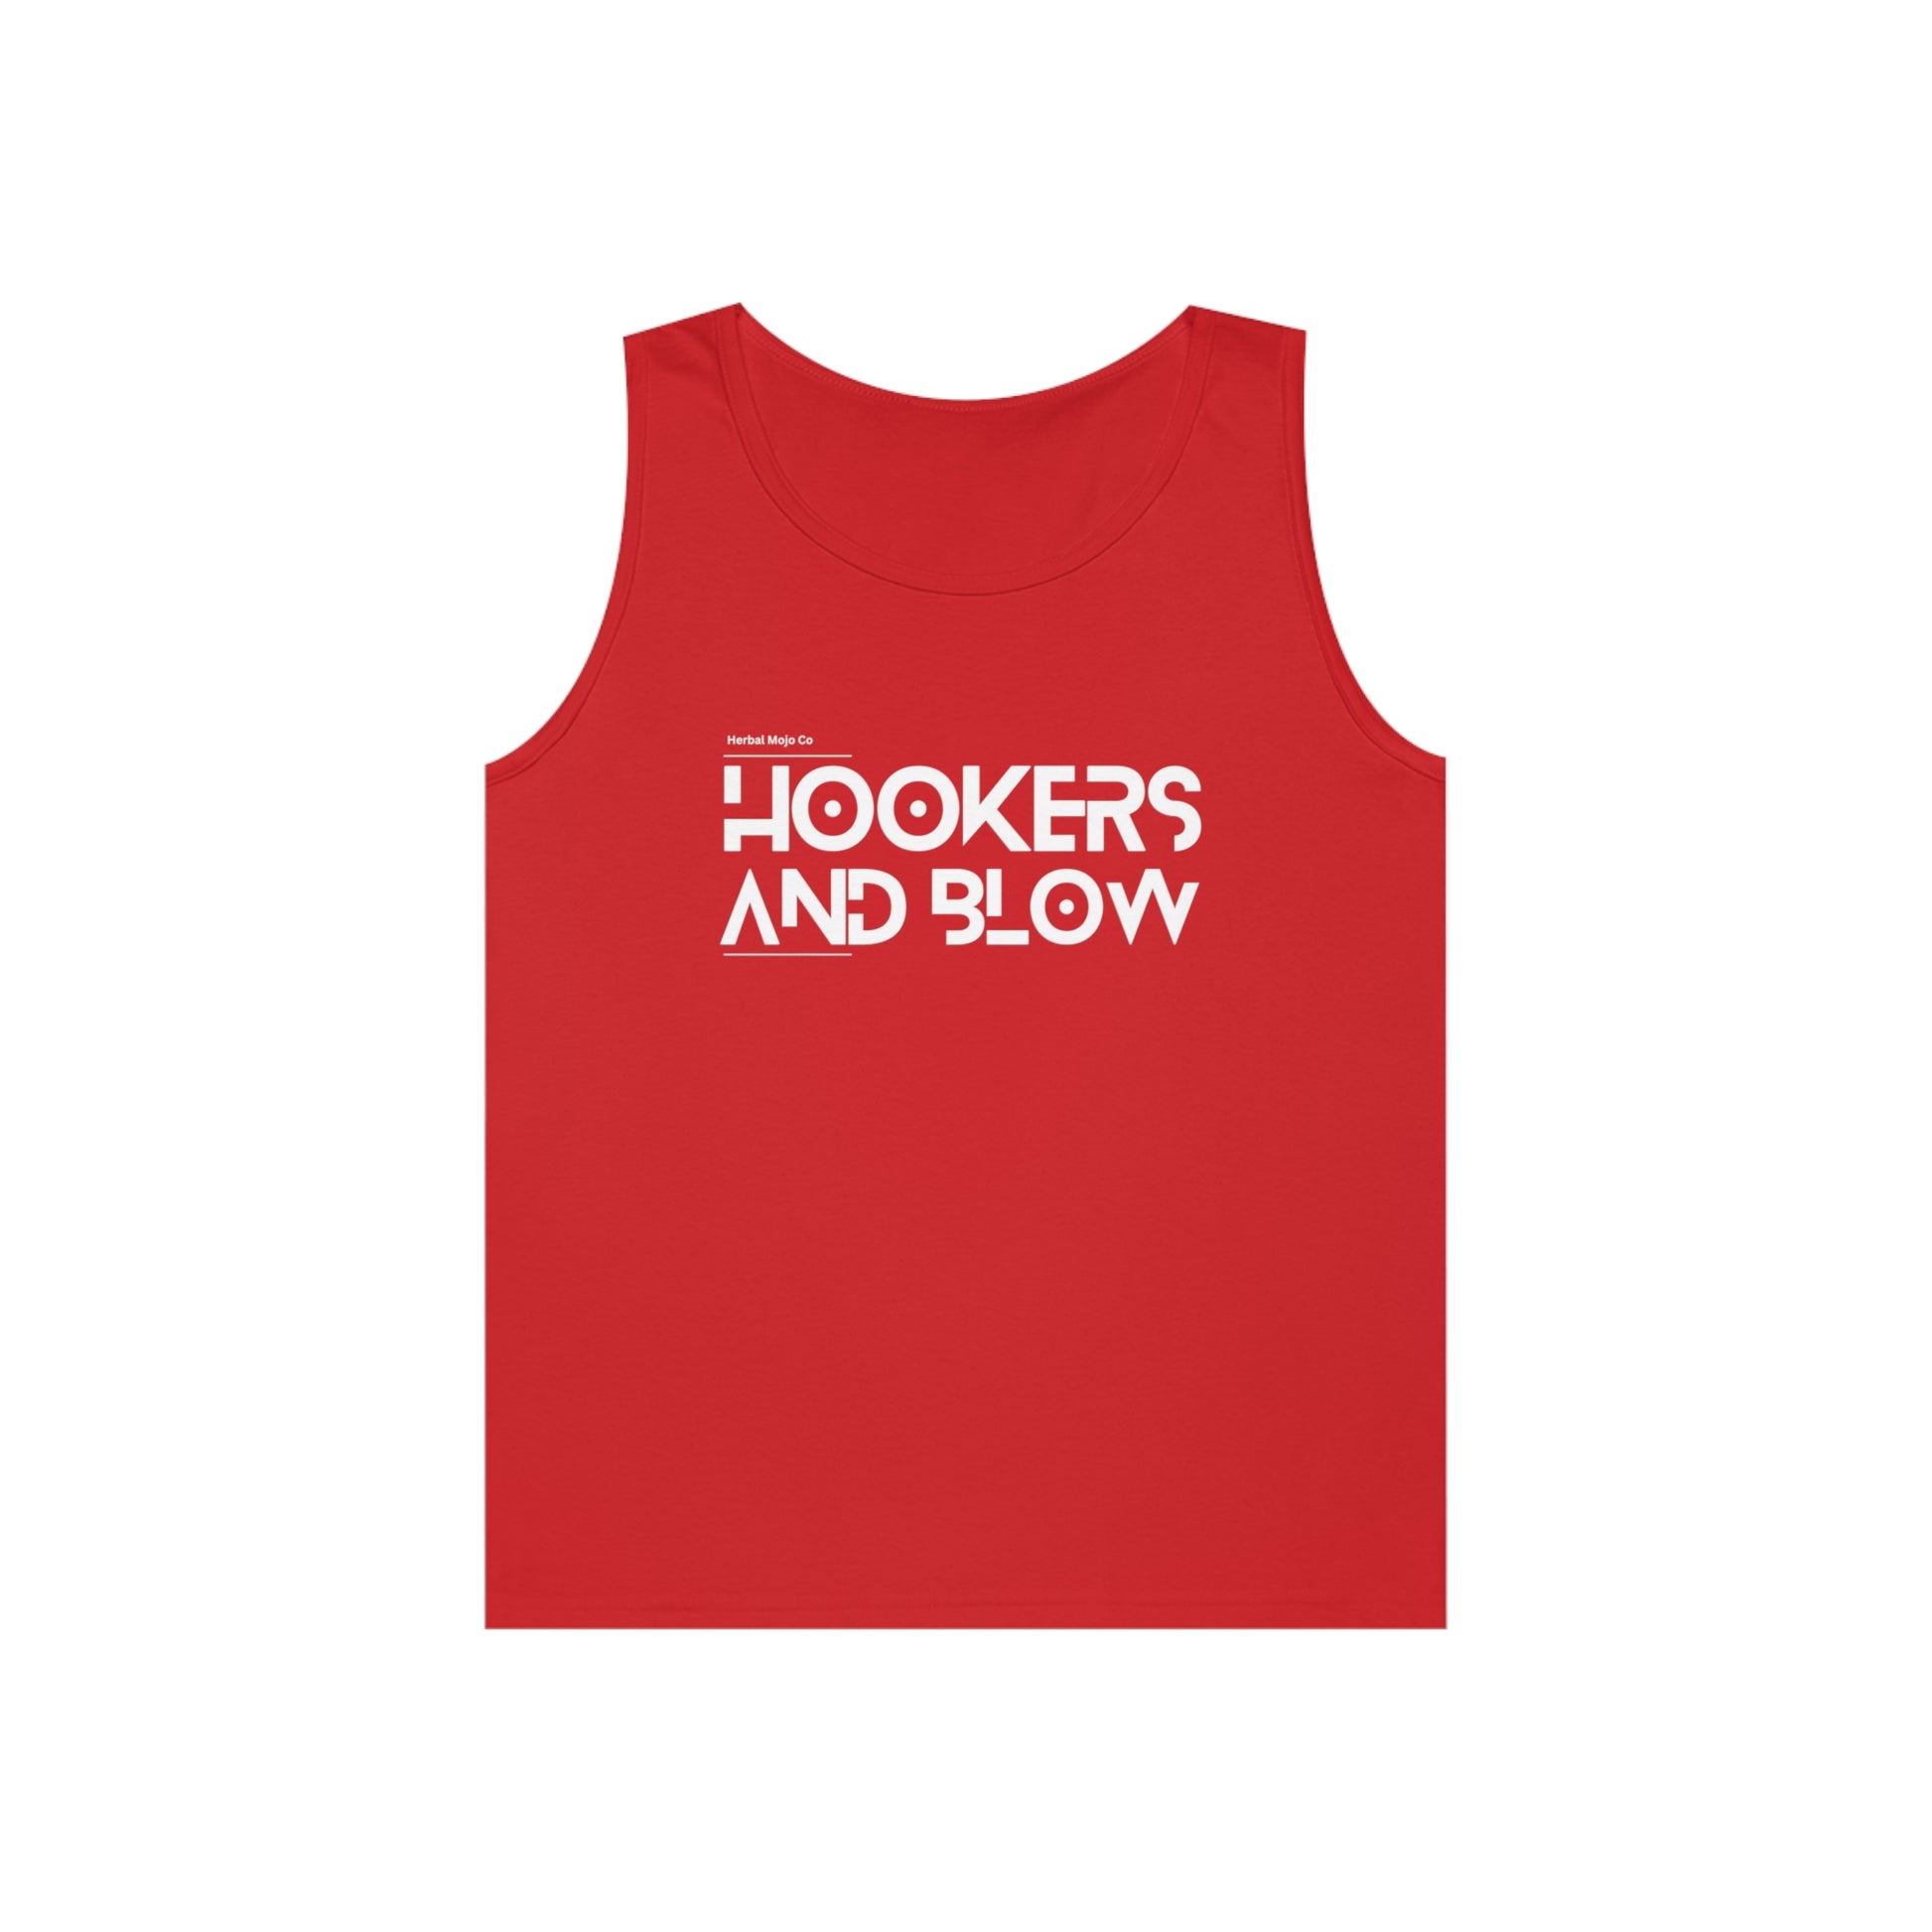 The Stamina for Men Hookers & Blow unisex Red cotton tank top product shot with white background